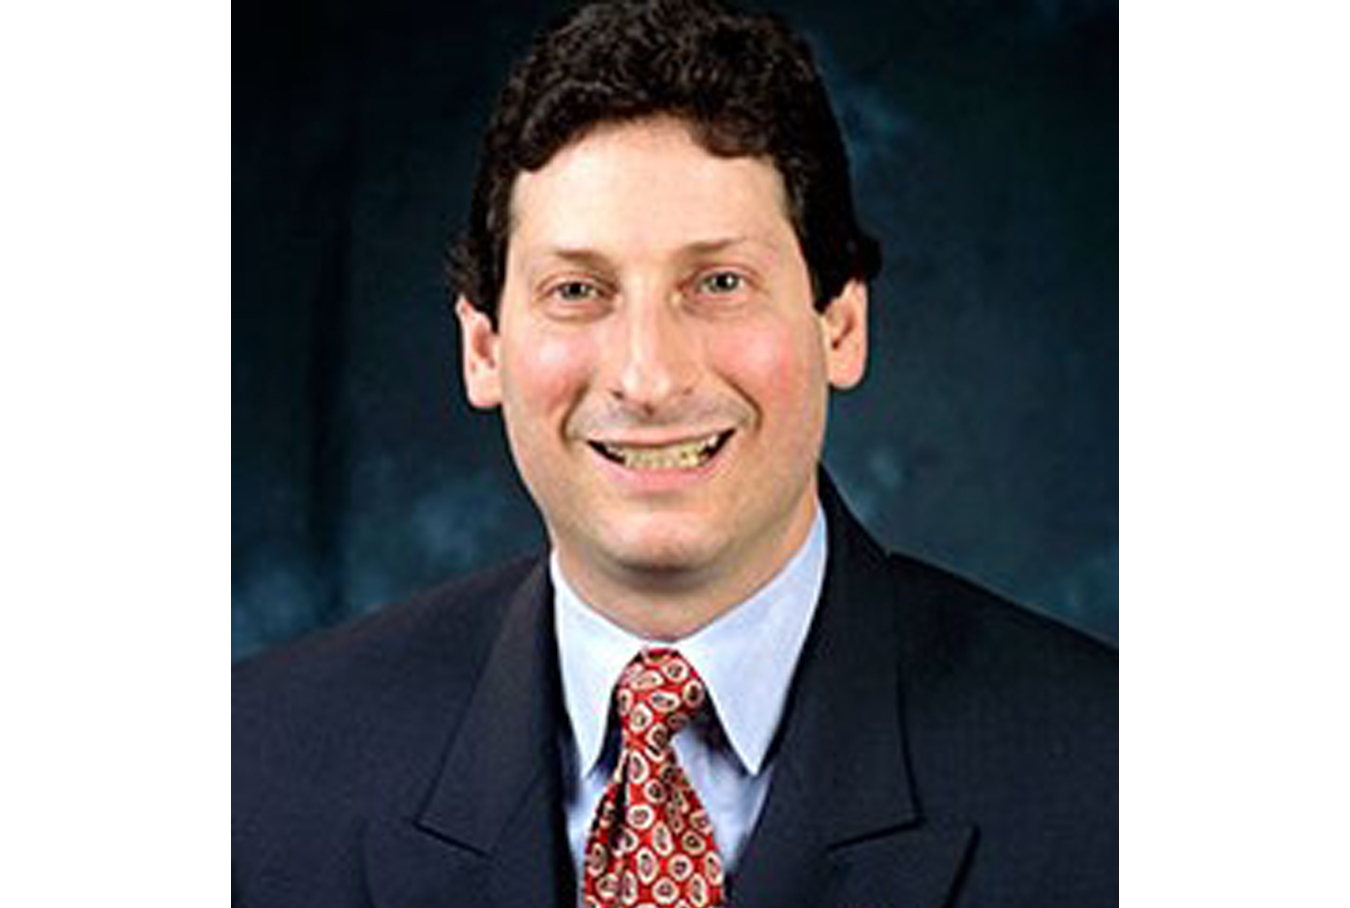 Brian Levin, Director of The Center For the Study of Hate and Extremism.